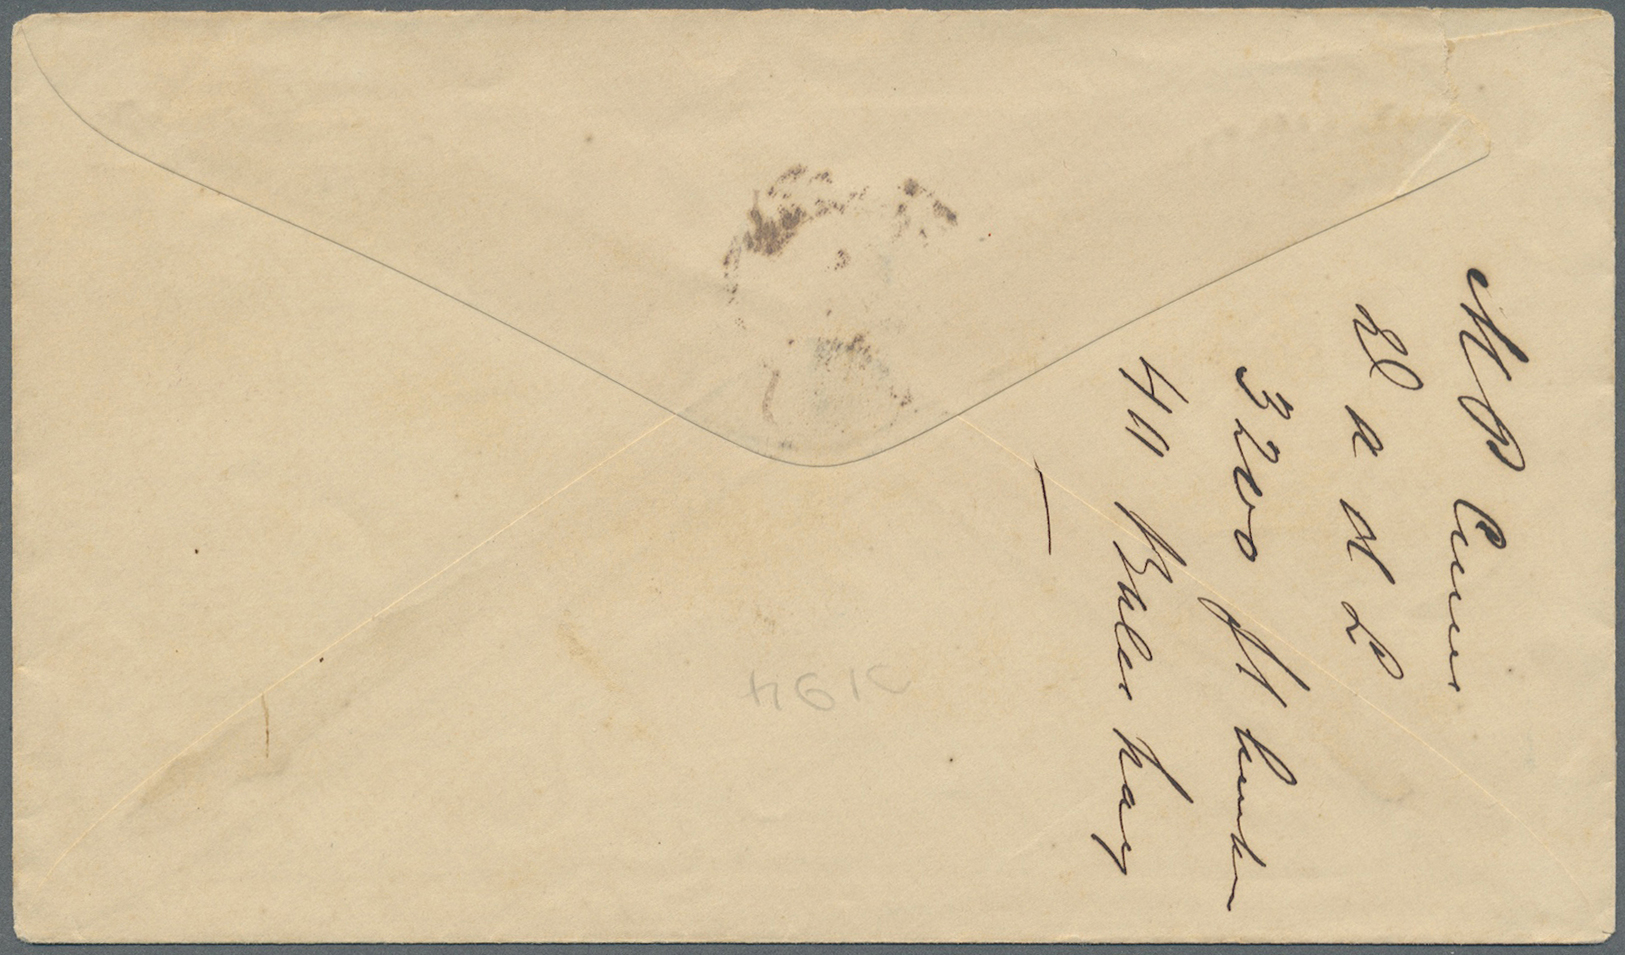 GA Curacao: 1885. United States Postal Stationery Envelope 5c Brown Canceled By Oval 'Red D Line Of S.S. New York' In Vi - Curacao, Netherlands Antilles, Aruba